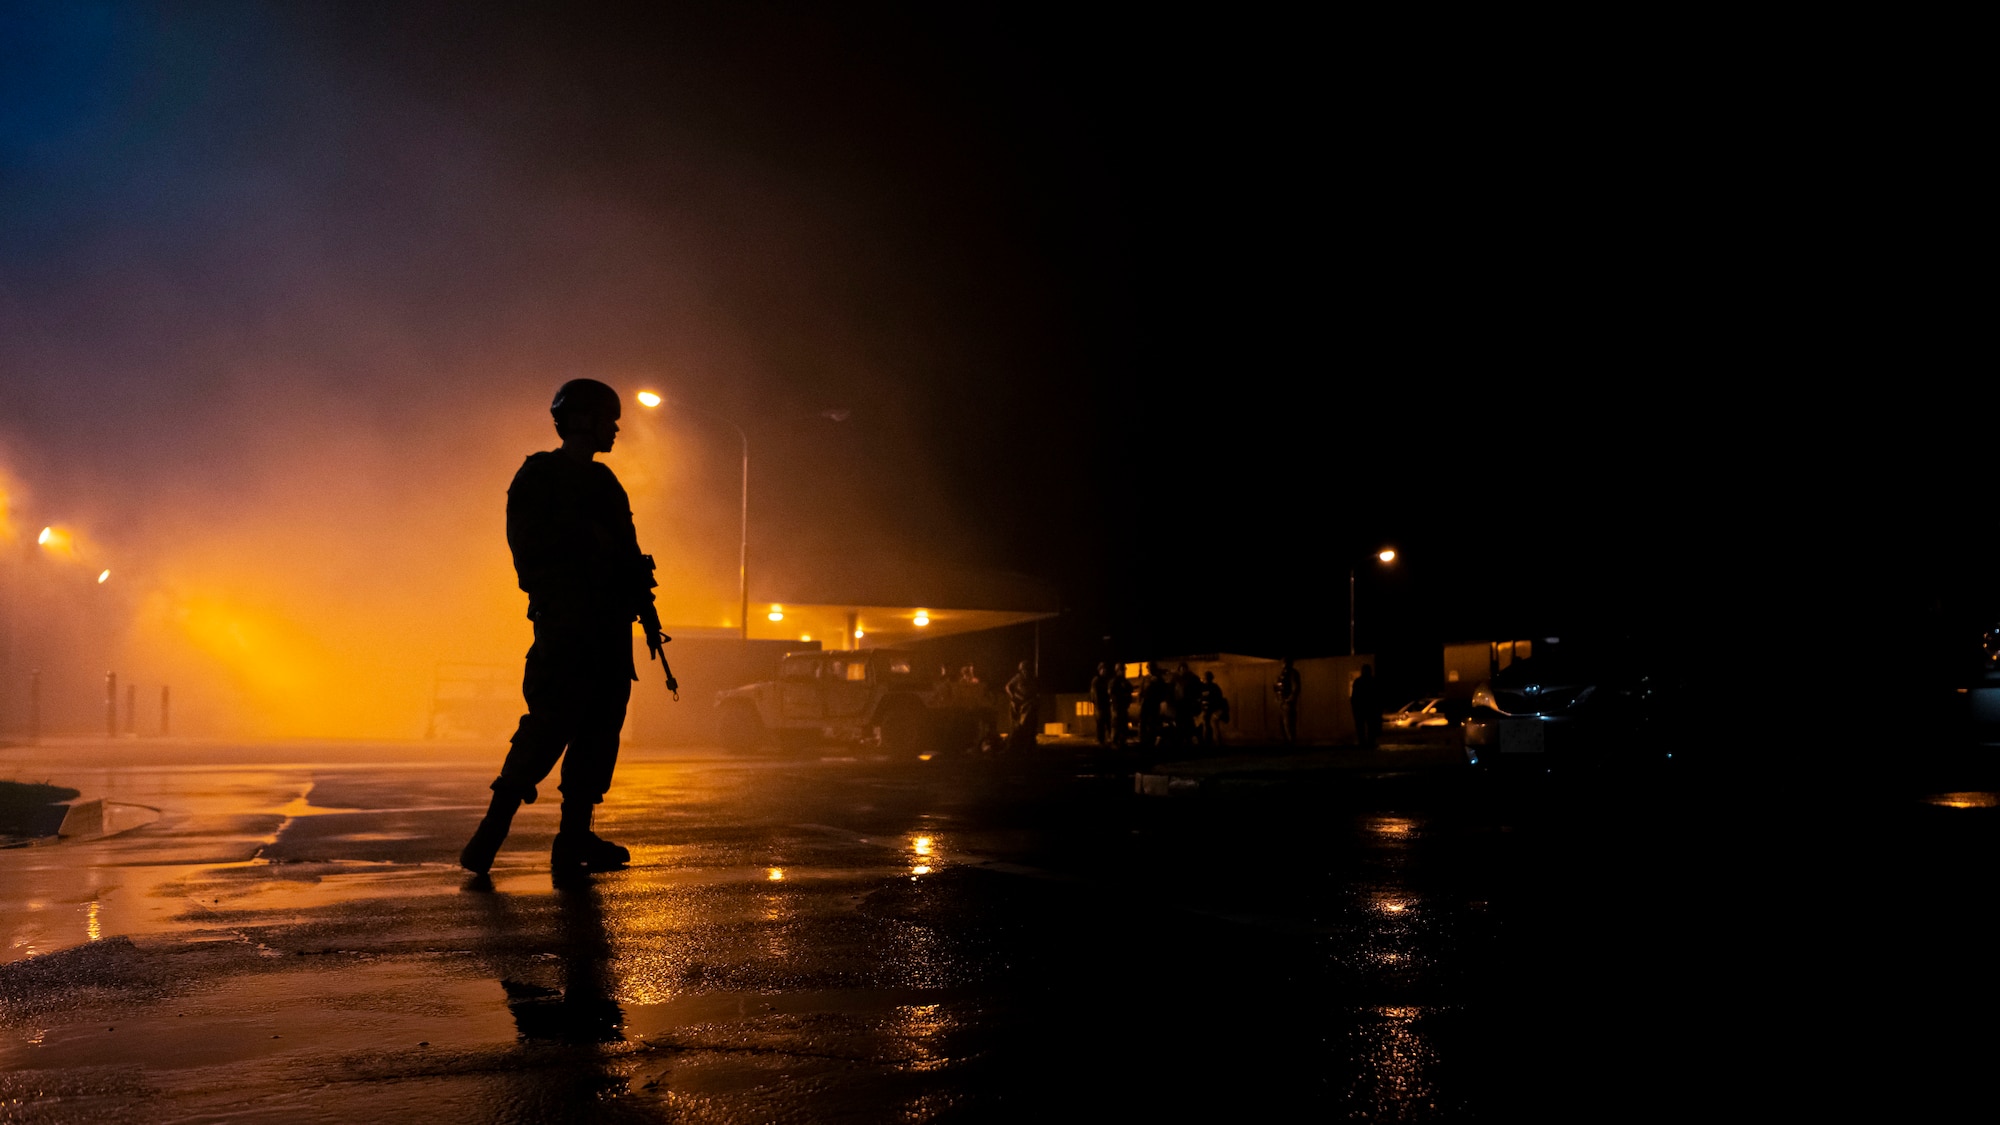 U.S. Air Force member conducts patrol on the perimeter of an incident scene.